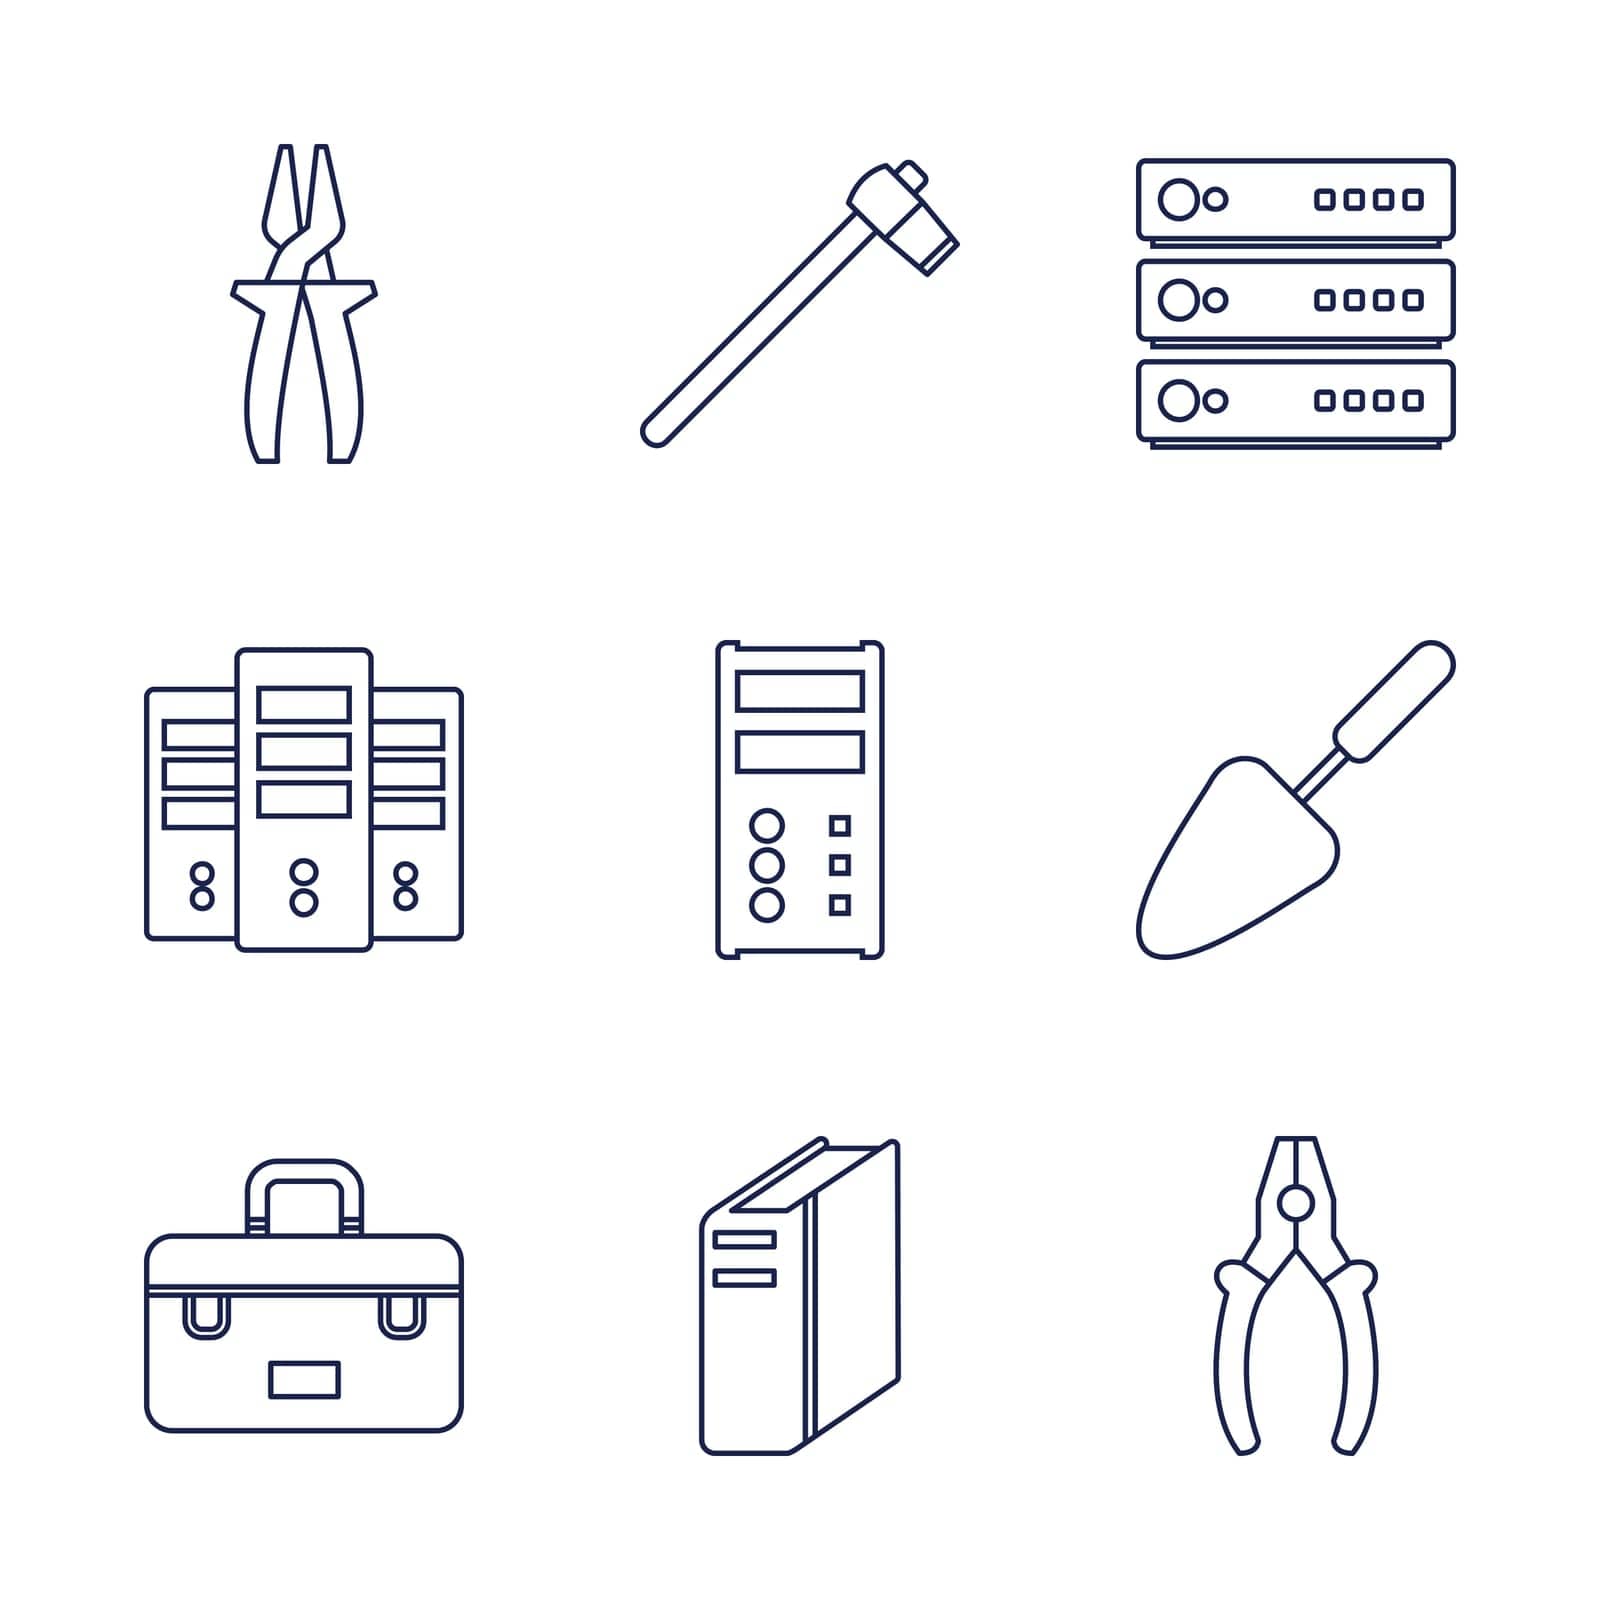 symbol,repair,server,backup,access,hammer,hosting,concept,icon,sign,isolated,remote,network,professional,computer,modern,fix,web,design,pliers,lock,construction,connection,vector,hardware,trowel,set,business,work,metal,equipment,cpu,technology,tool,system,background,toolbox,garden,information,illustration,device,internet,object by ogqcorp